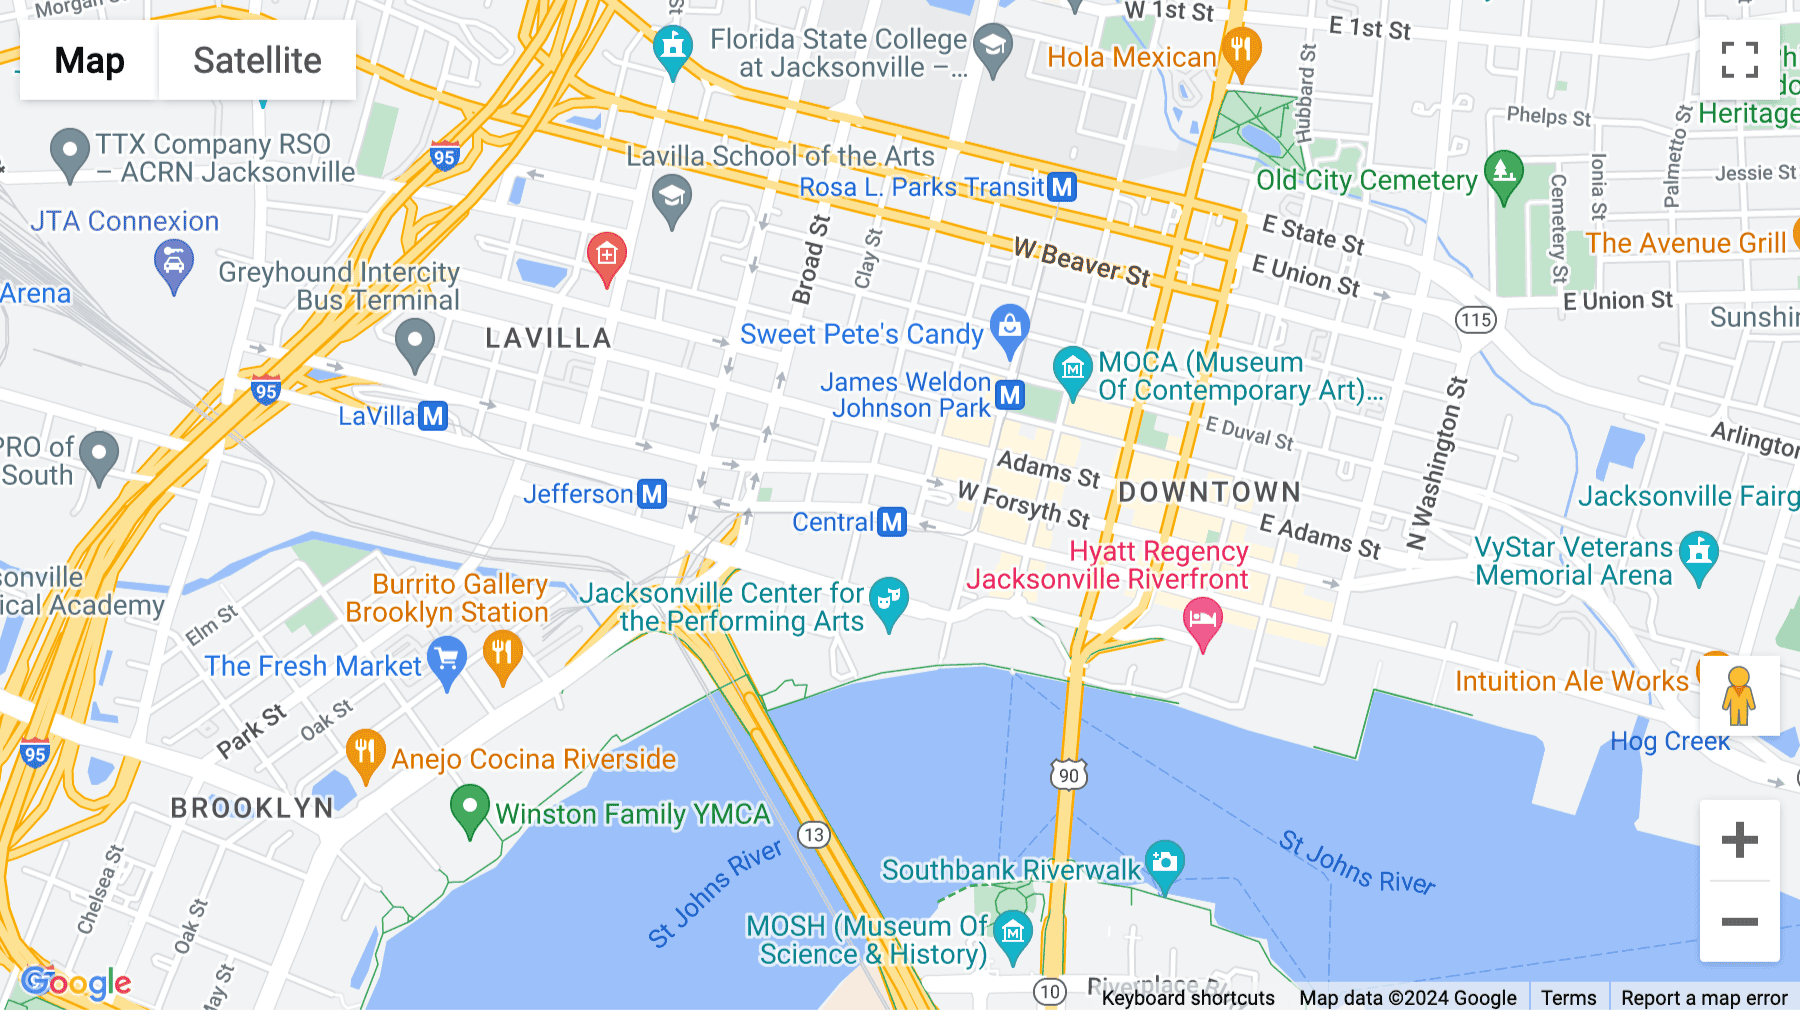 Click for interative map of 301 W. Bay Street, Suite 1400, Jacksonville